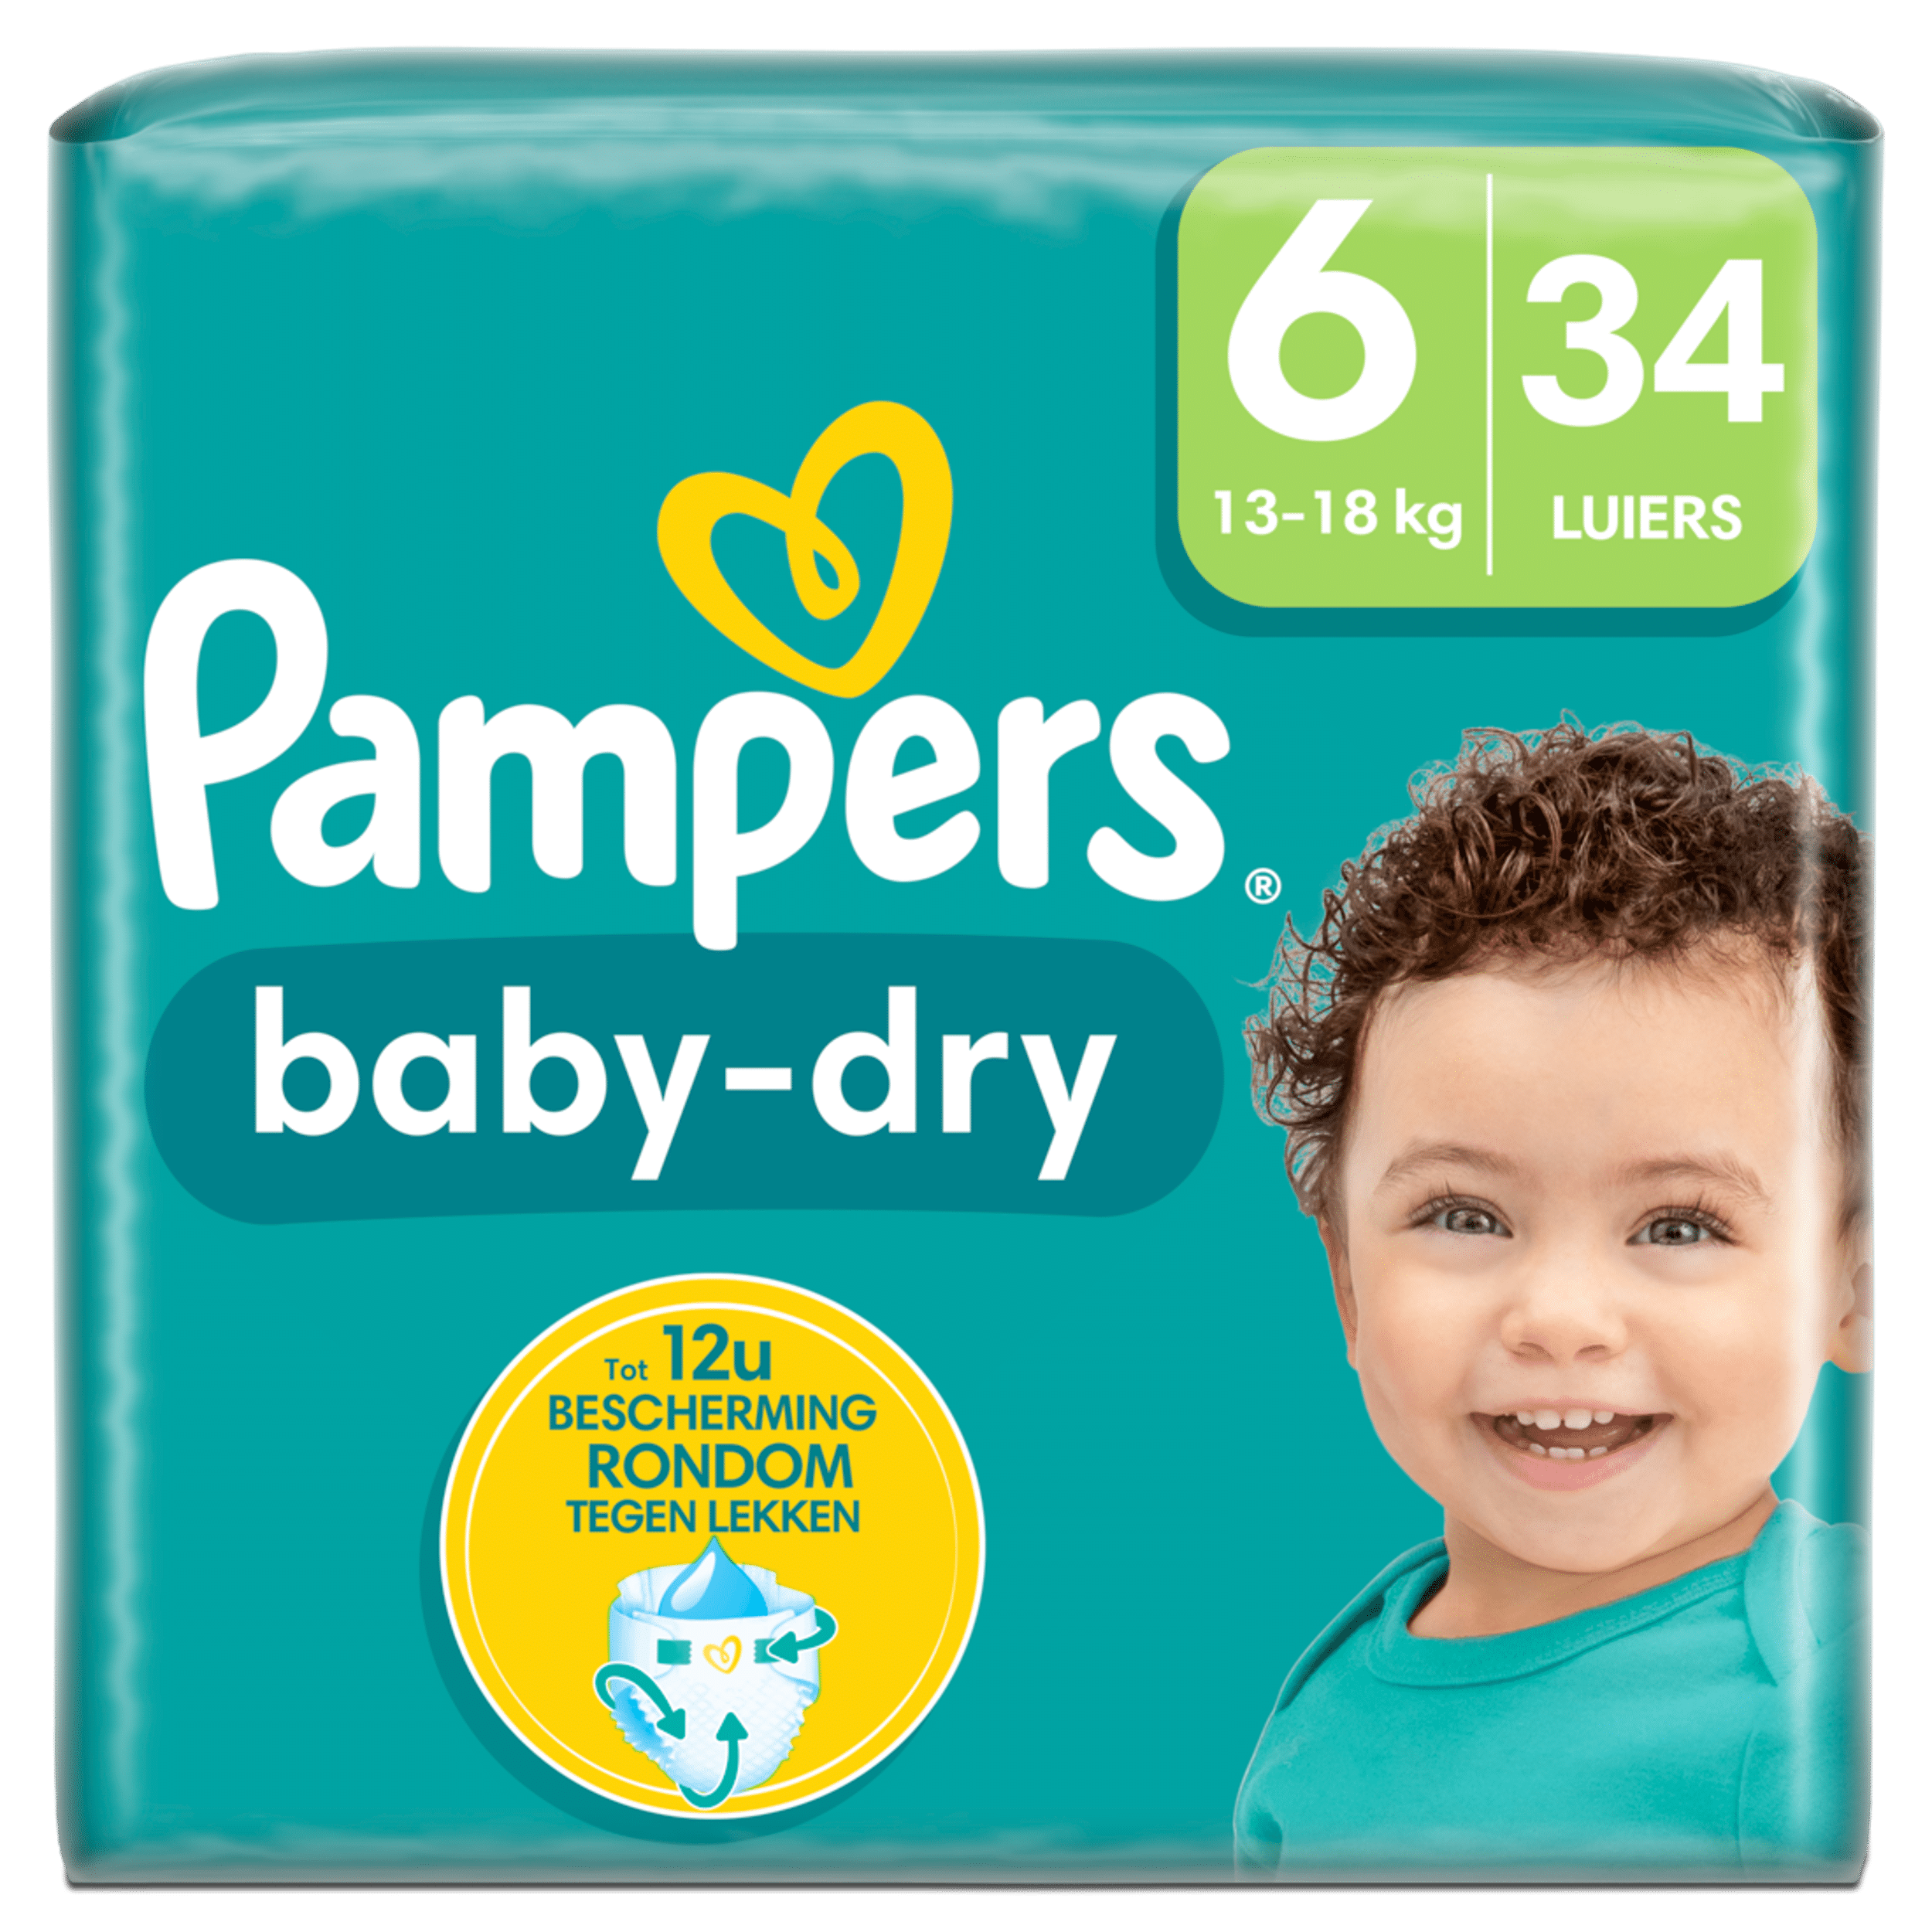 pampers pants 5 monthly pack